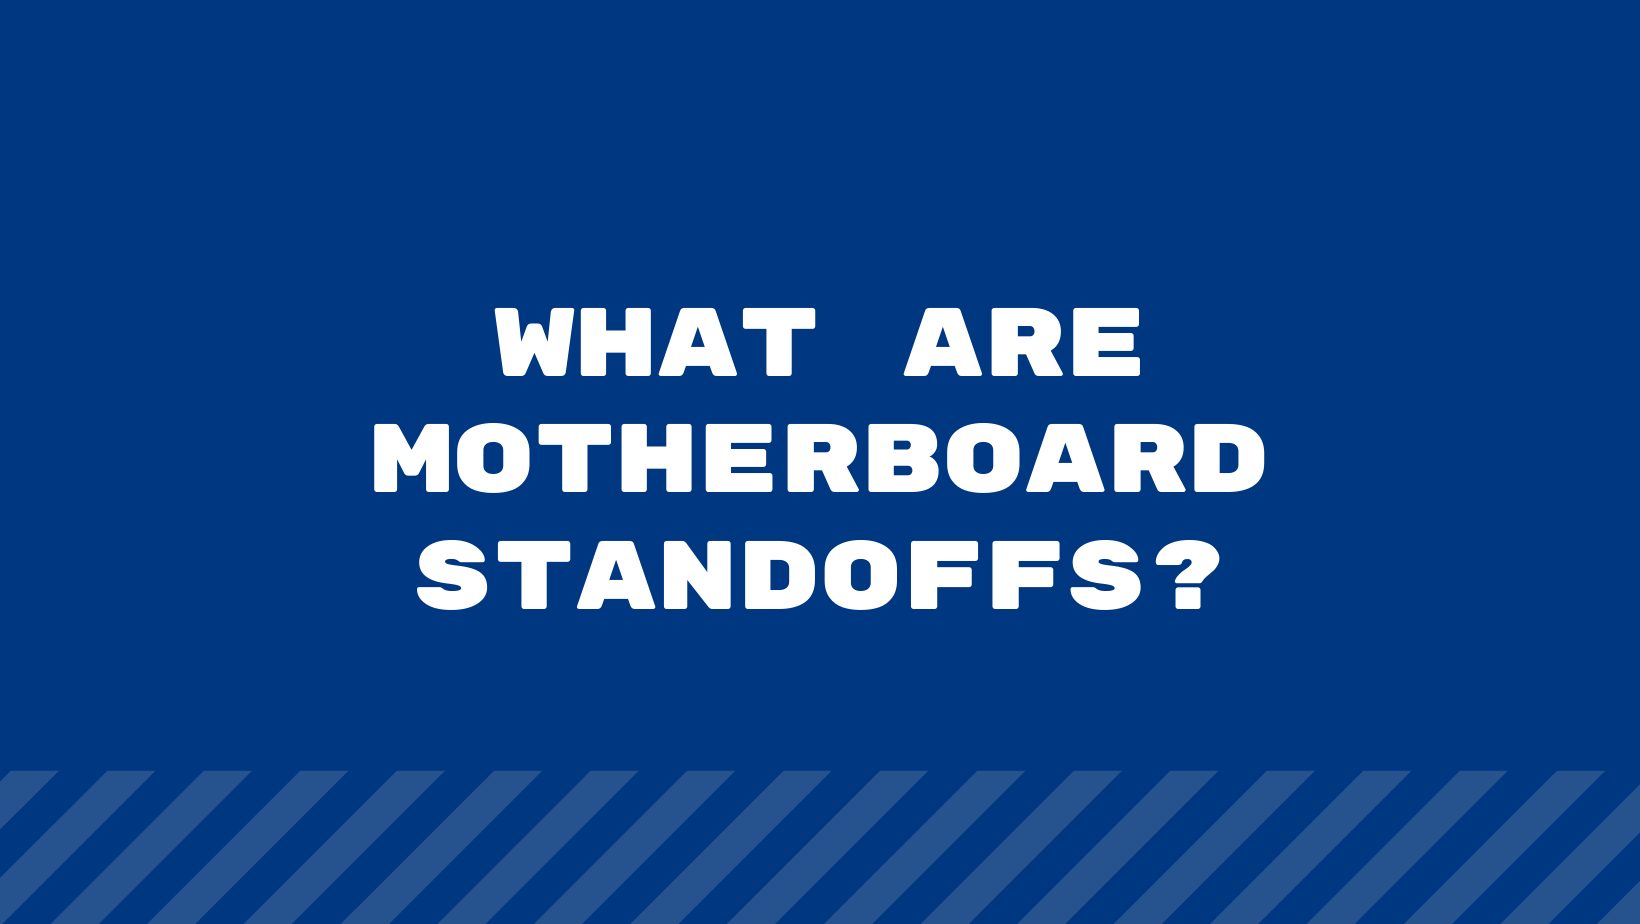 What Are Motherboard Standoffs